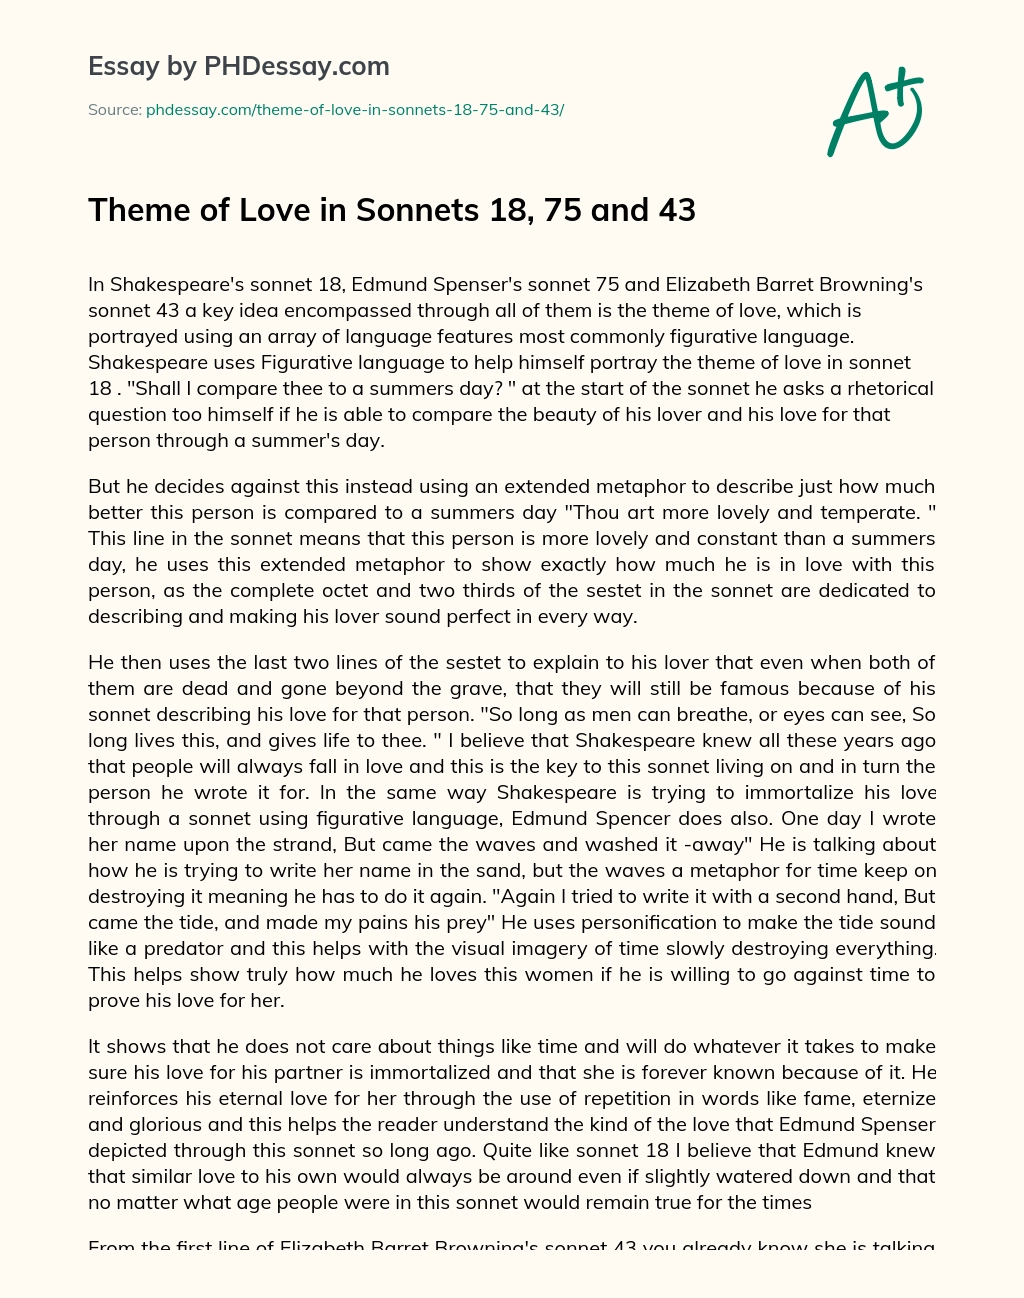 Theme of Love in Sonnets 18, 75 and 43 essay